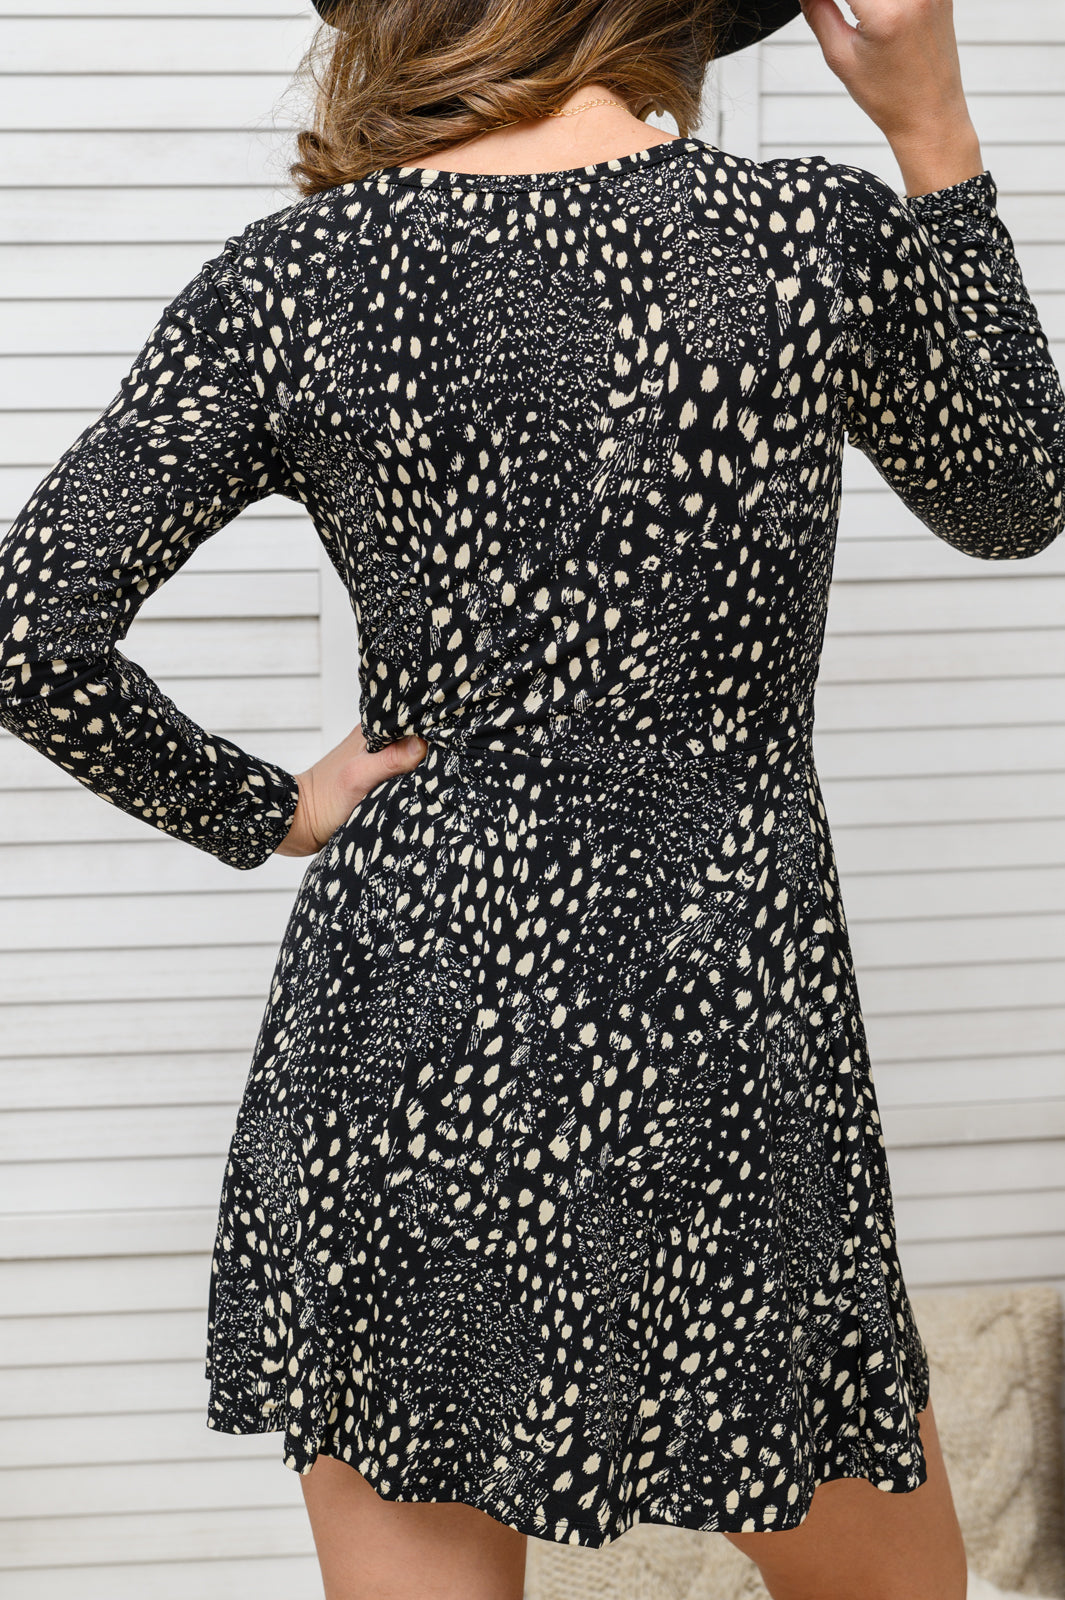 Fay Long Sleeve V Neck Skort Dress-Dresses-Inspired by Justeen-Women's Clothing Boutique in Chicago, Illinois